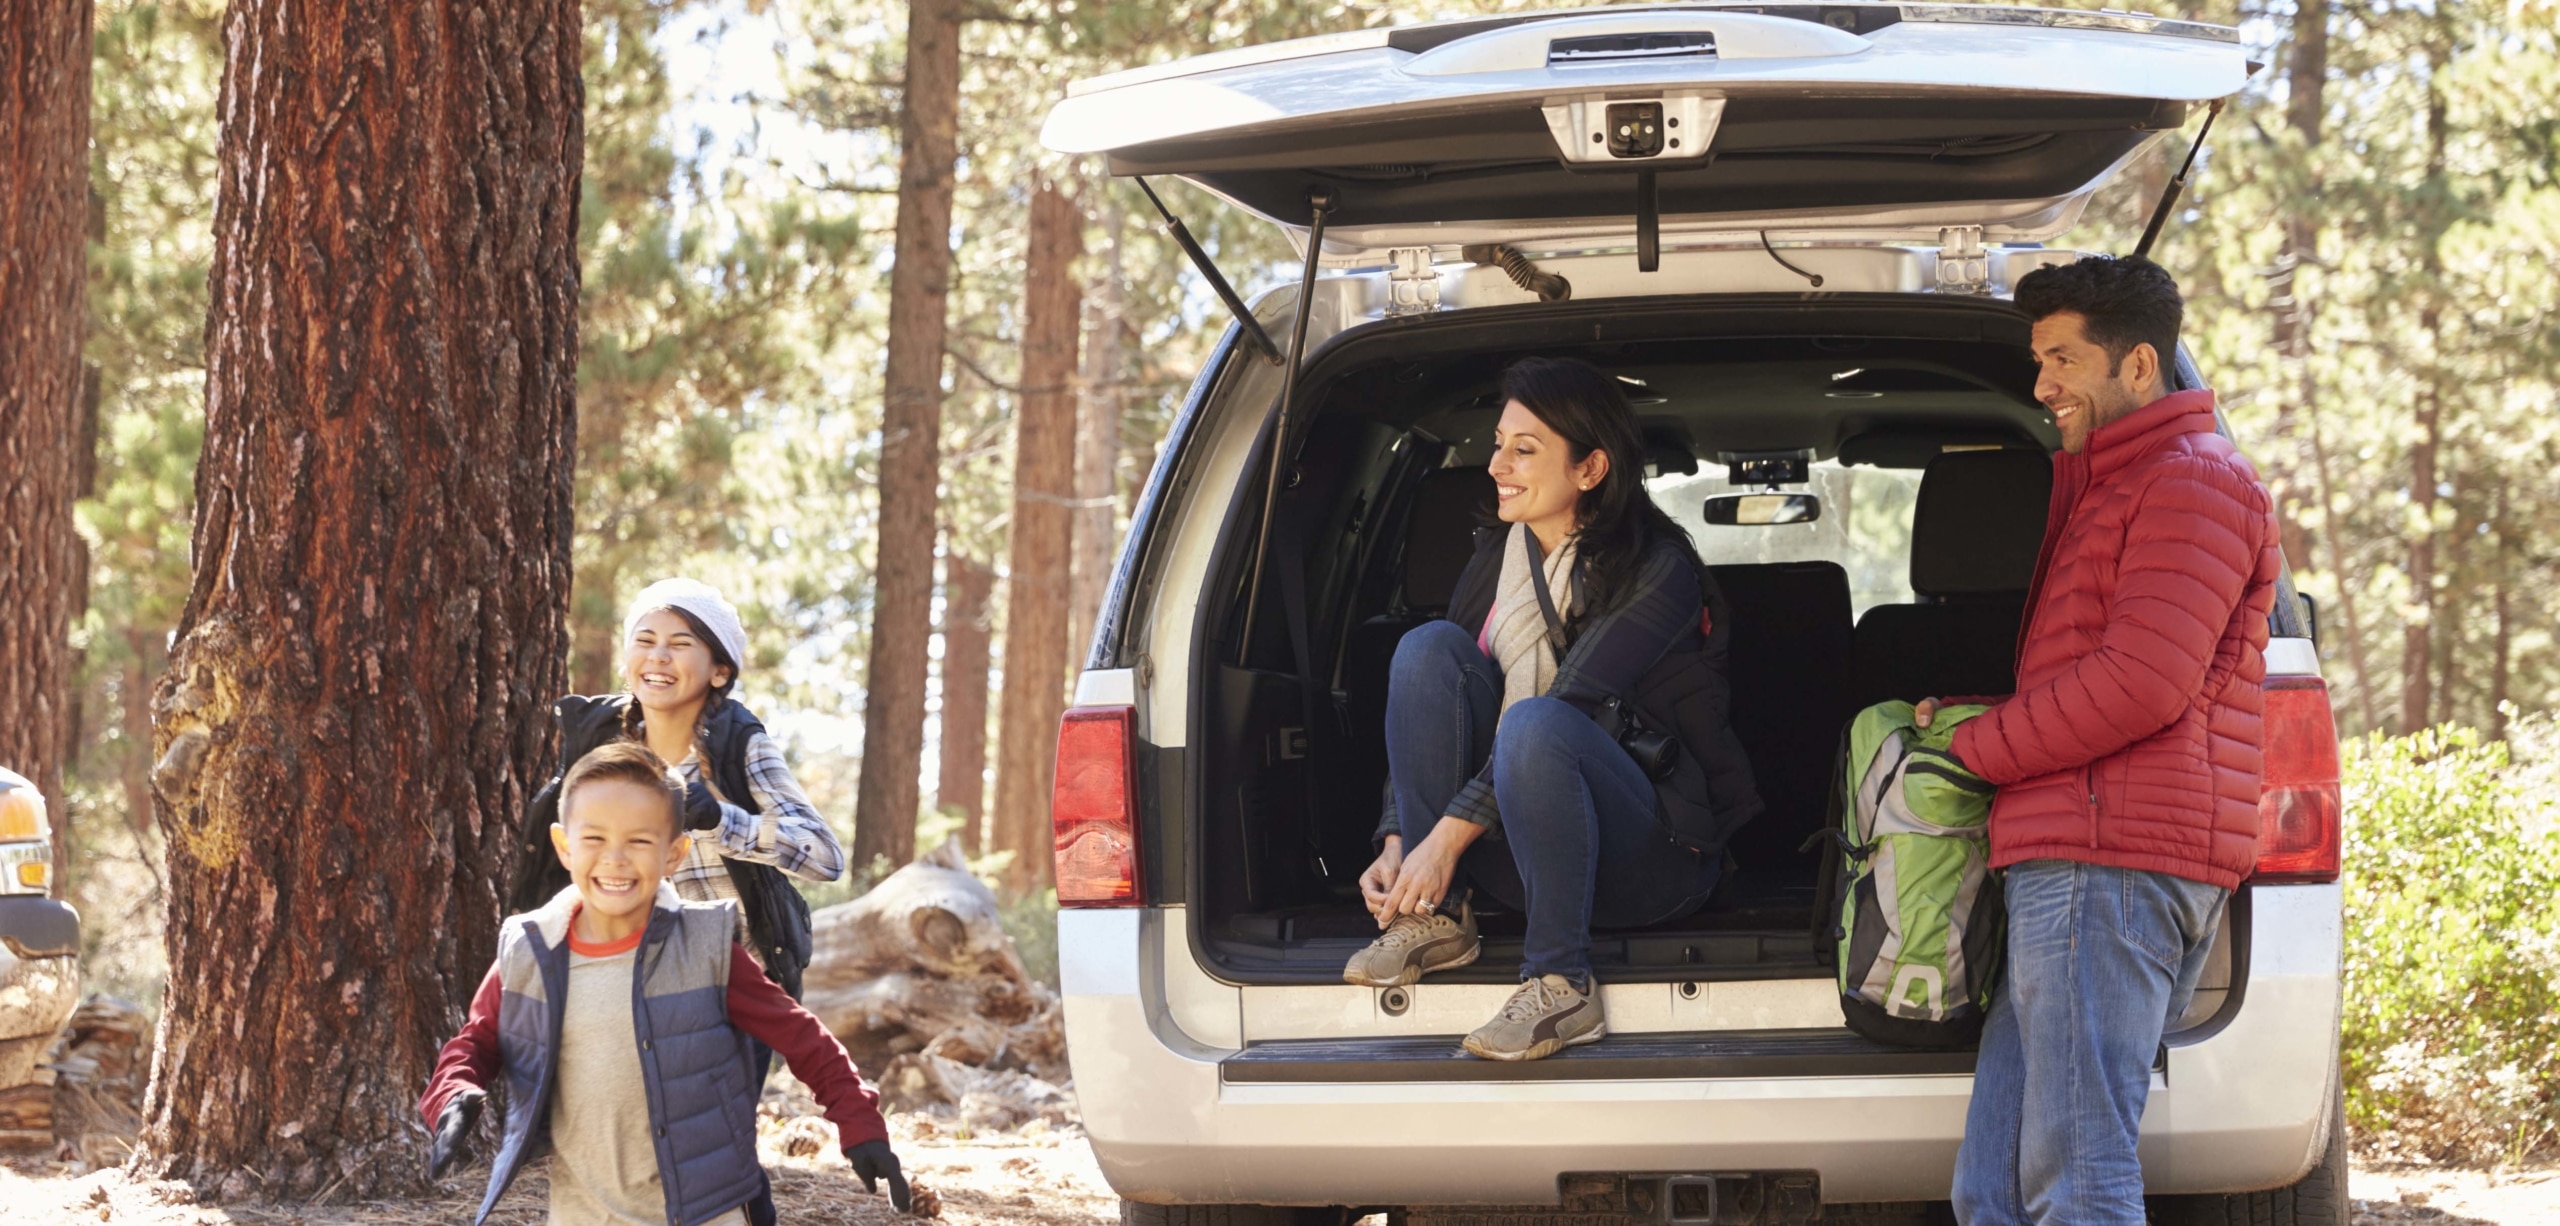 A family exploring outdoors in their hatchback | Sedan or Hatchback: Which Is Best?